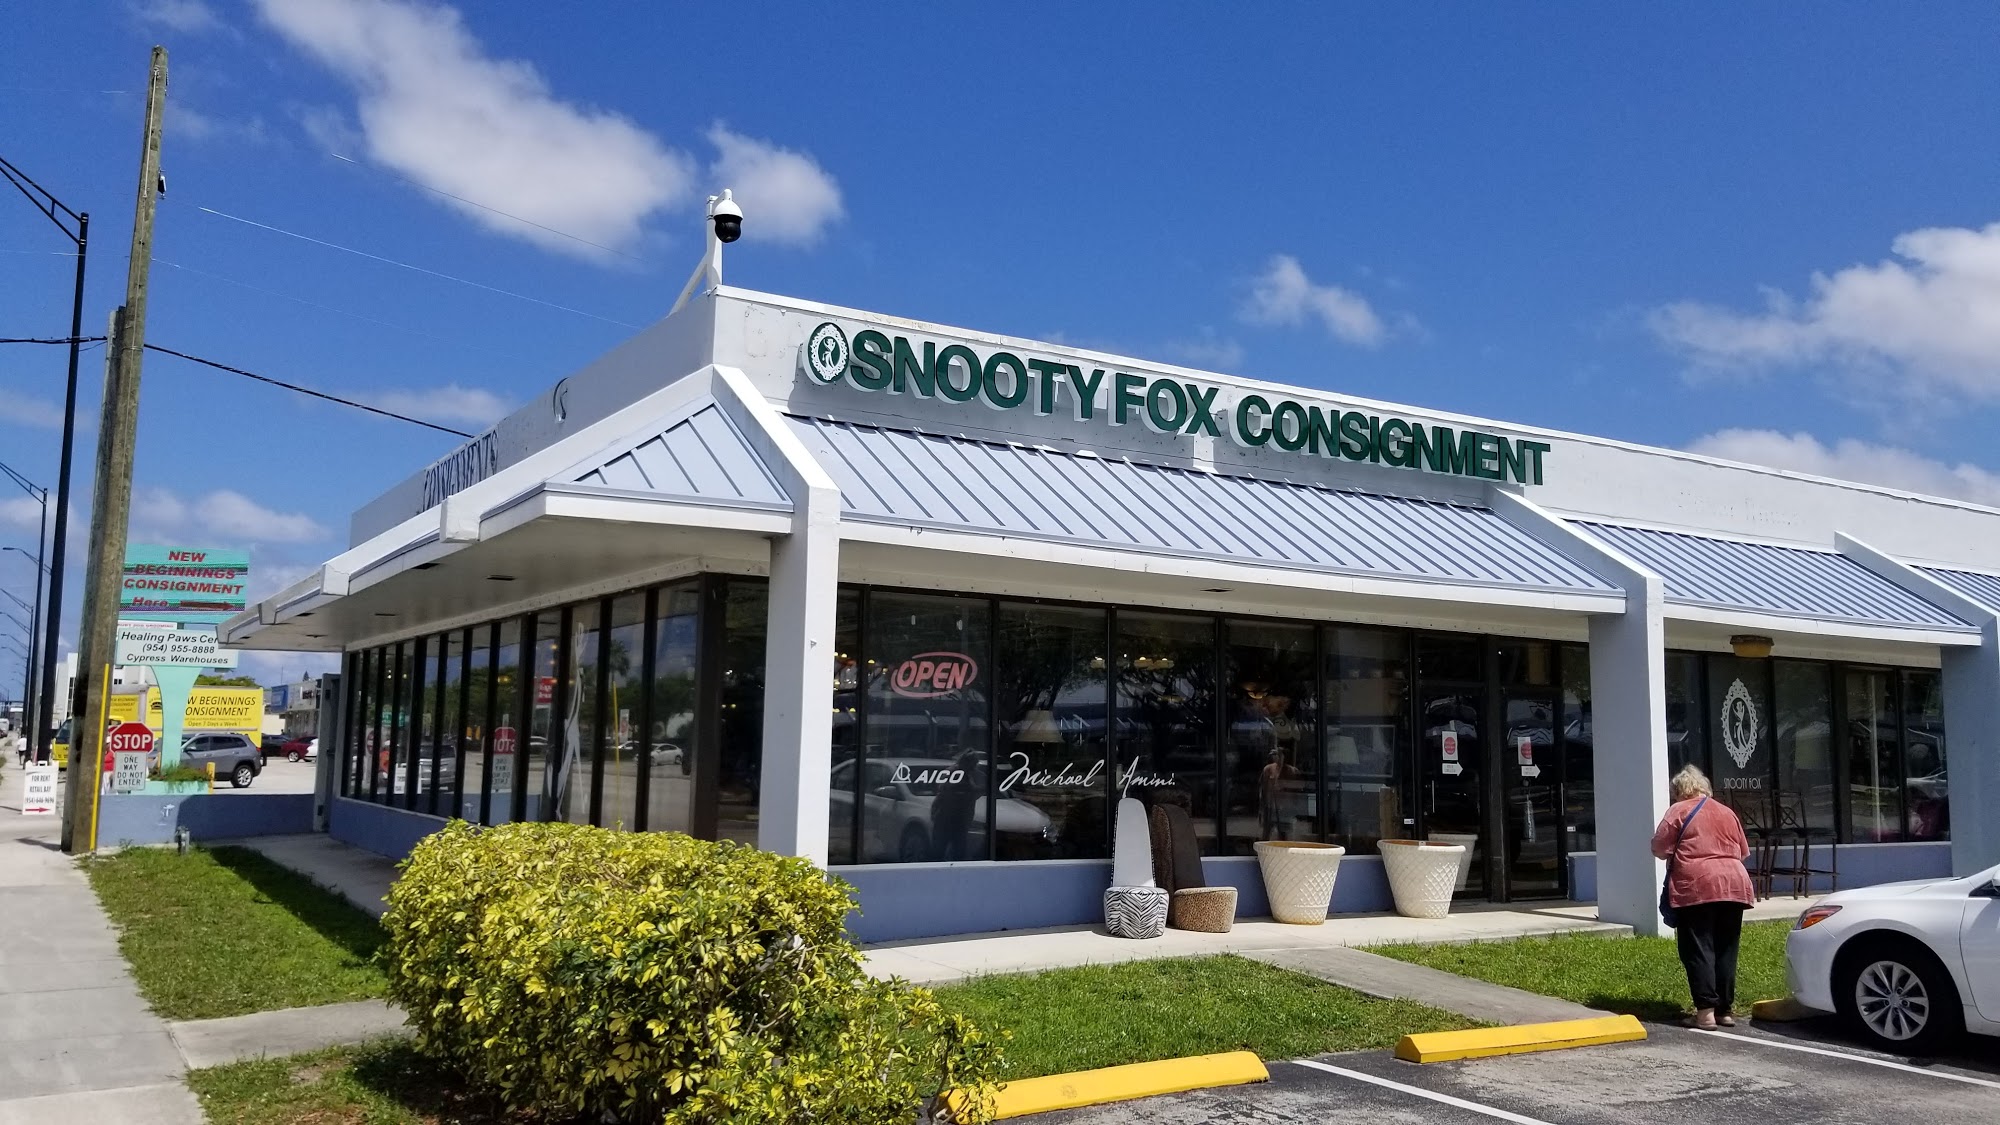 Snooty Fox Consignments